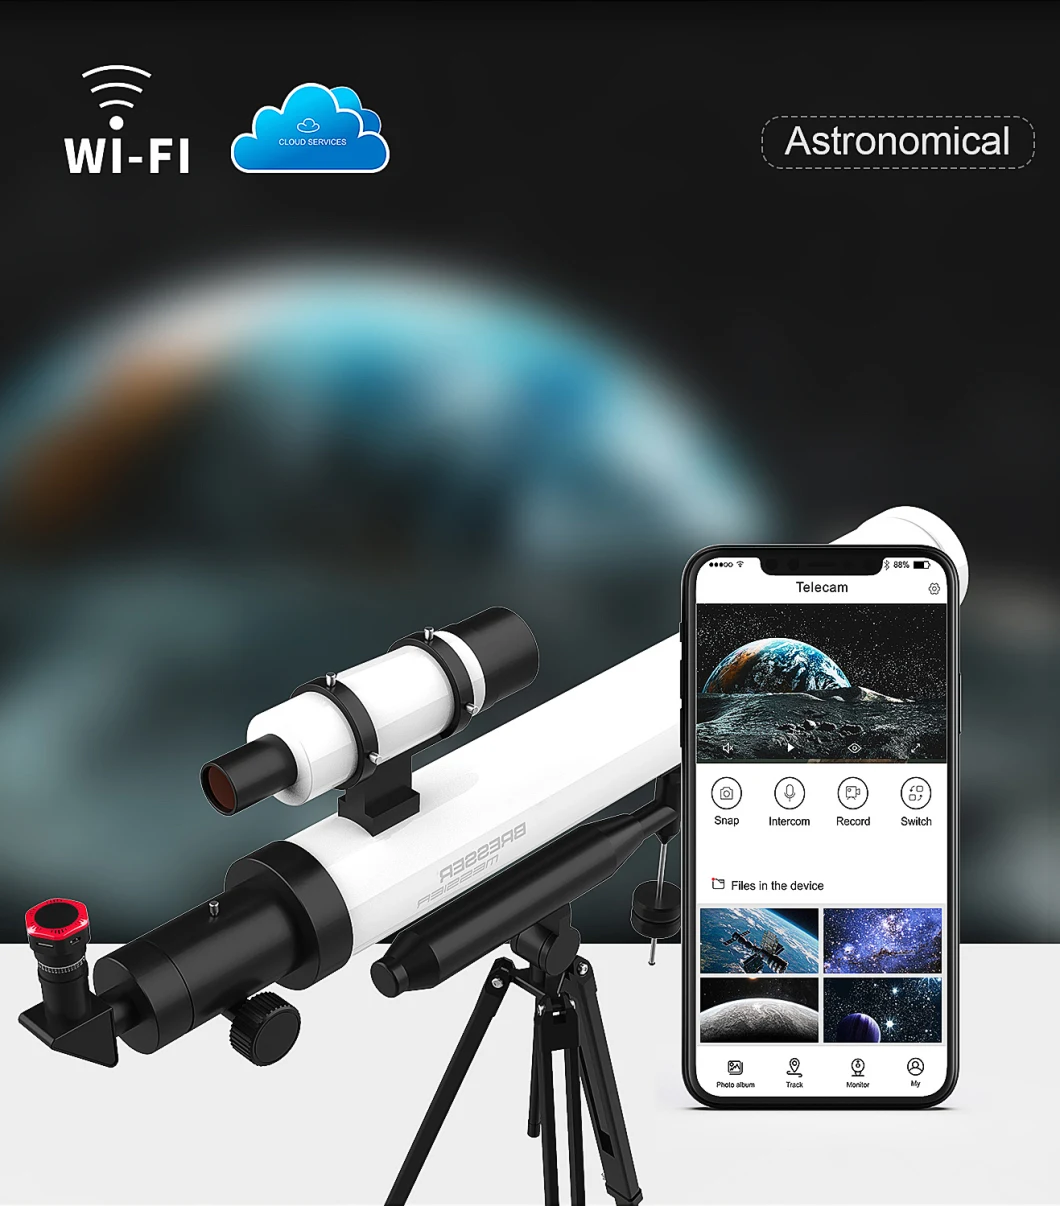 Visionking Telescope Camera CMOS Digital Eyepiece 2MP Astronomy Camera Dynamic Observation for Telescope Planetary Viewing Photo